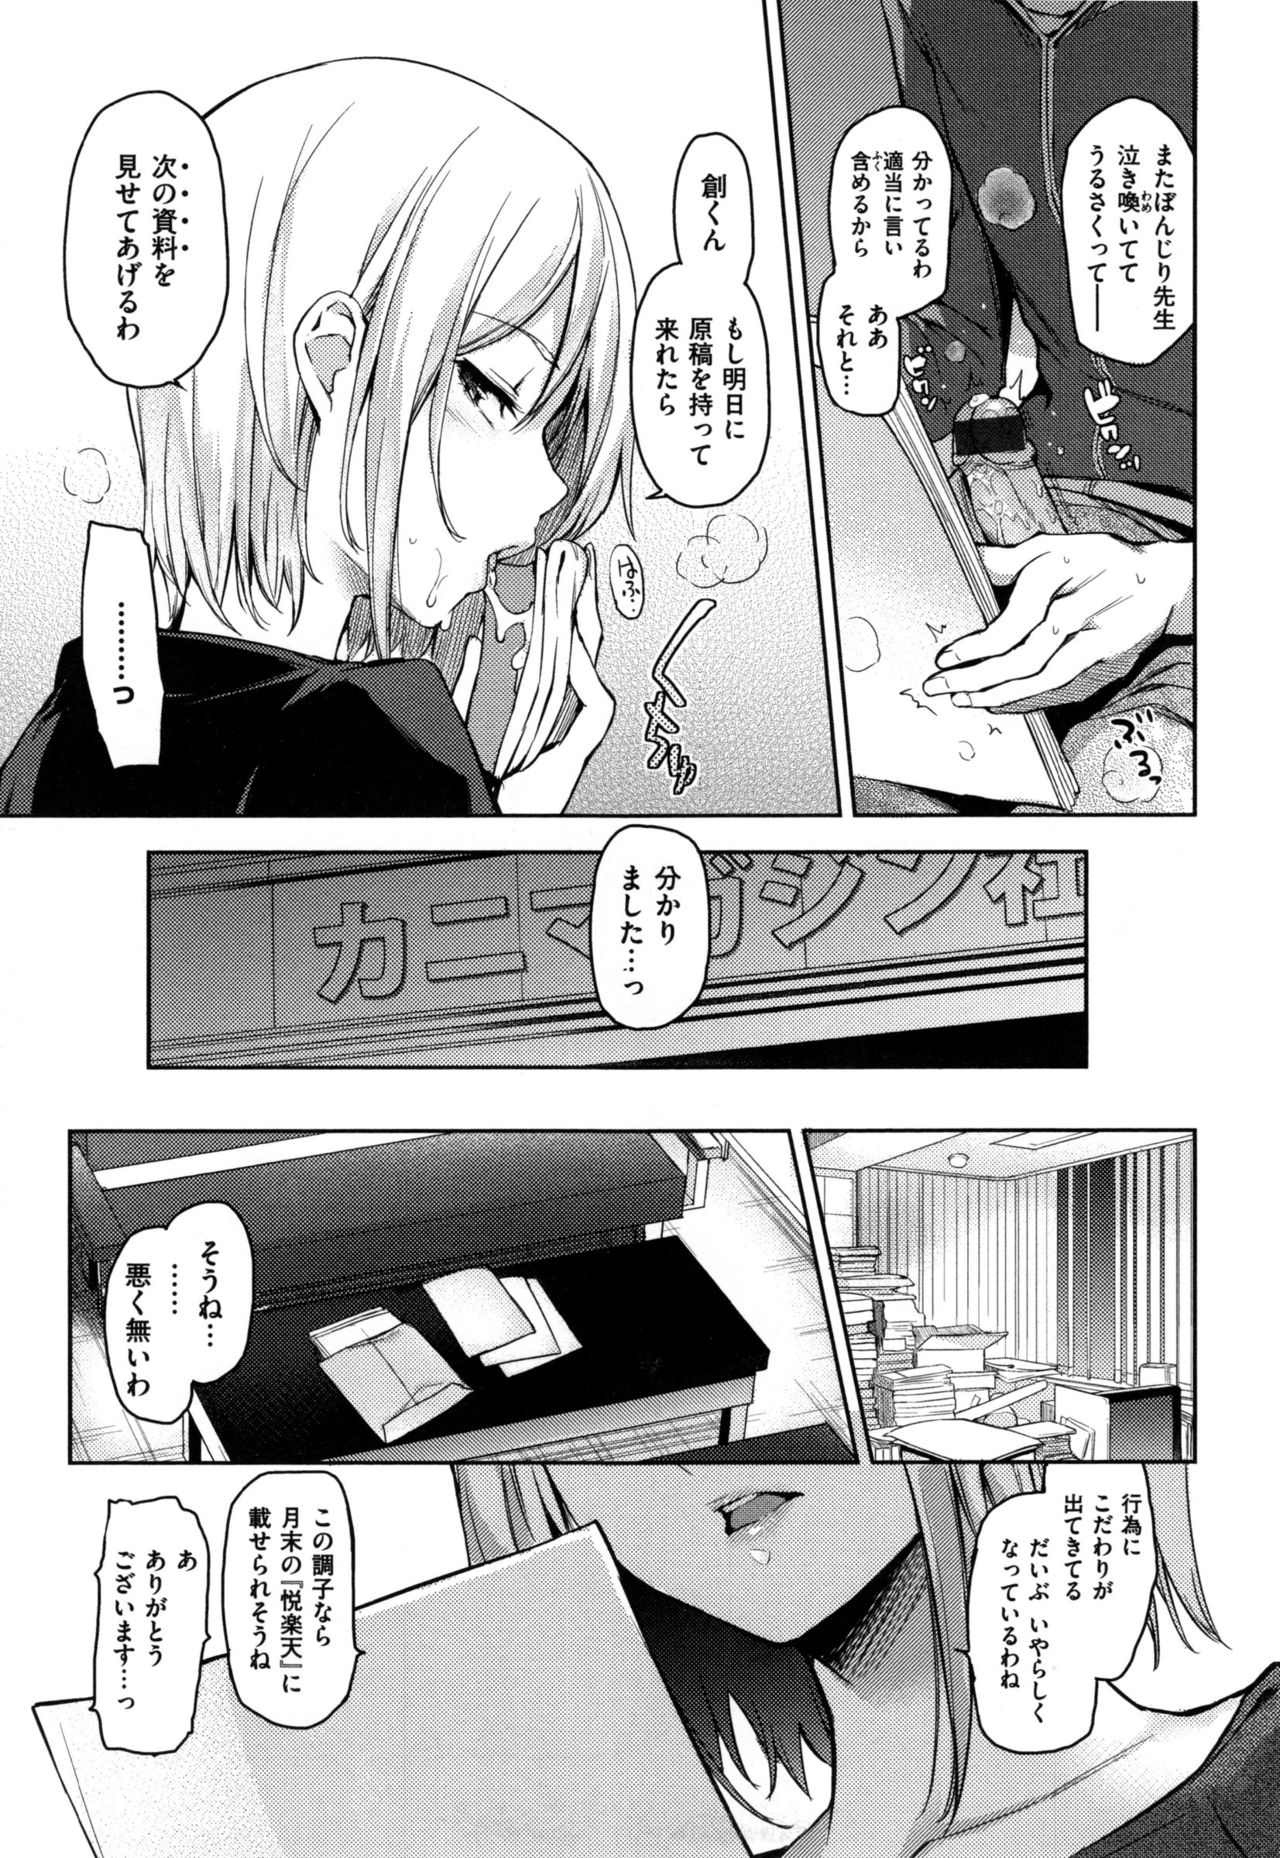 [Michiking] Shujuu Ecstasy - Sexual Relation of Master and Servant.  - page 40 full